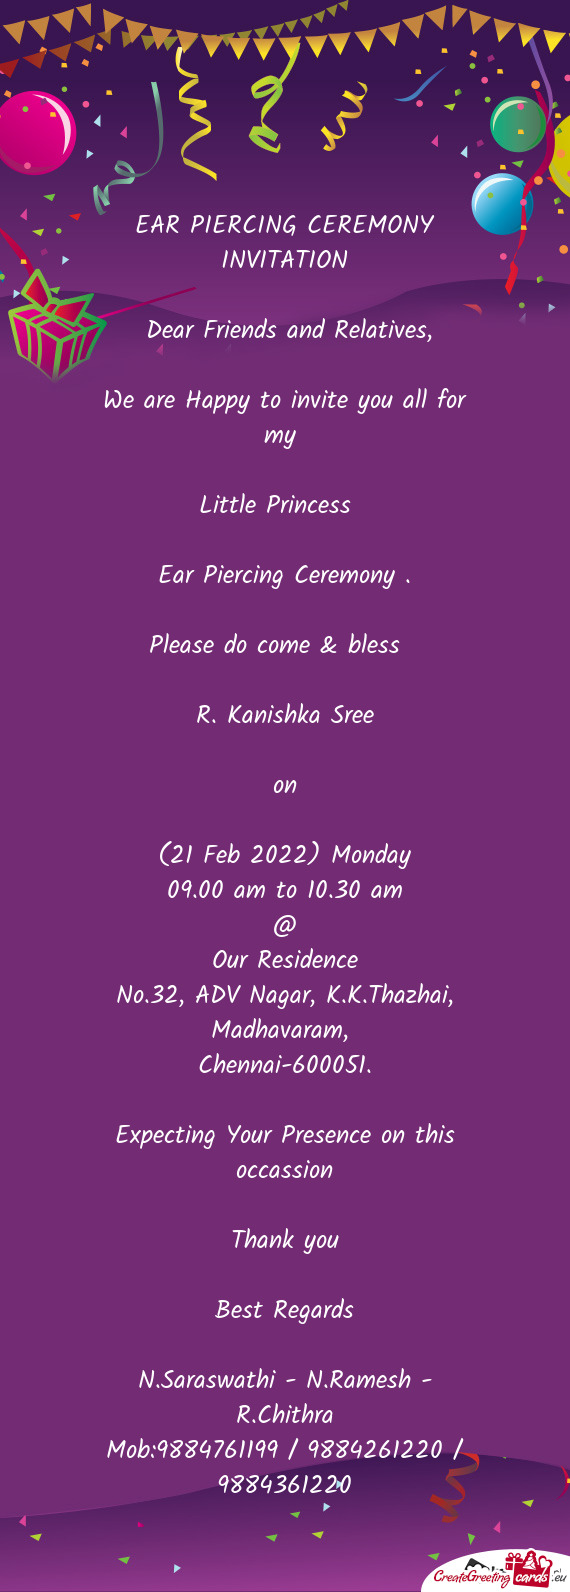 We are Happy to invite you all for my